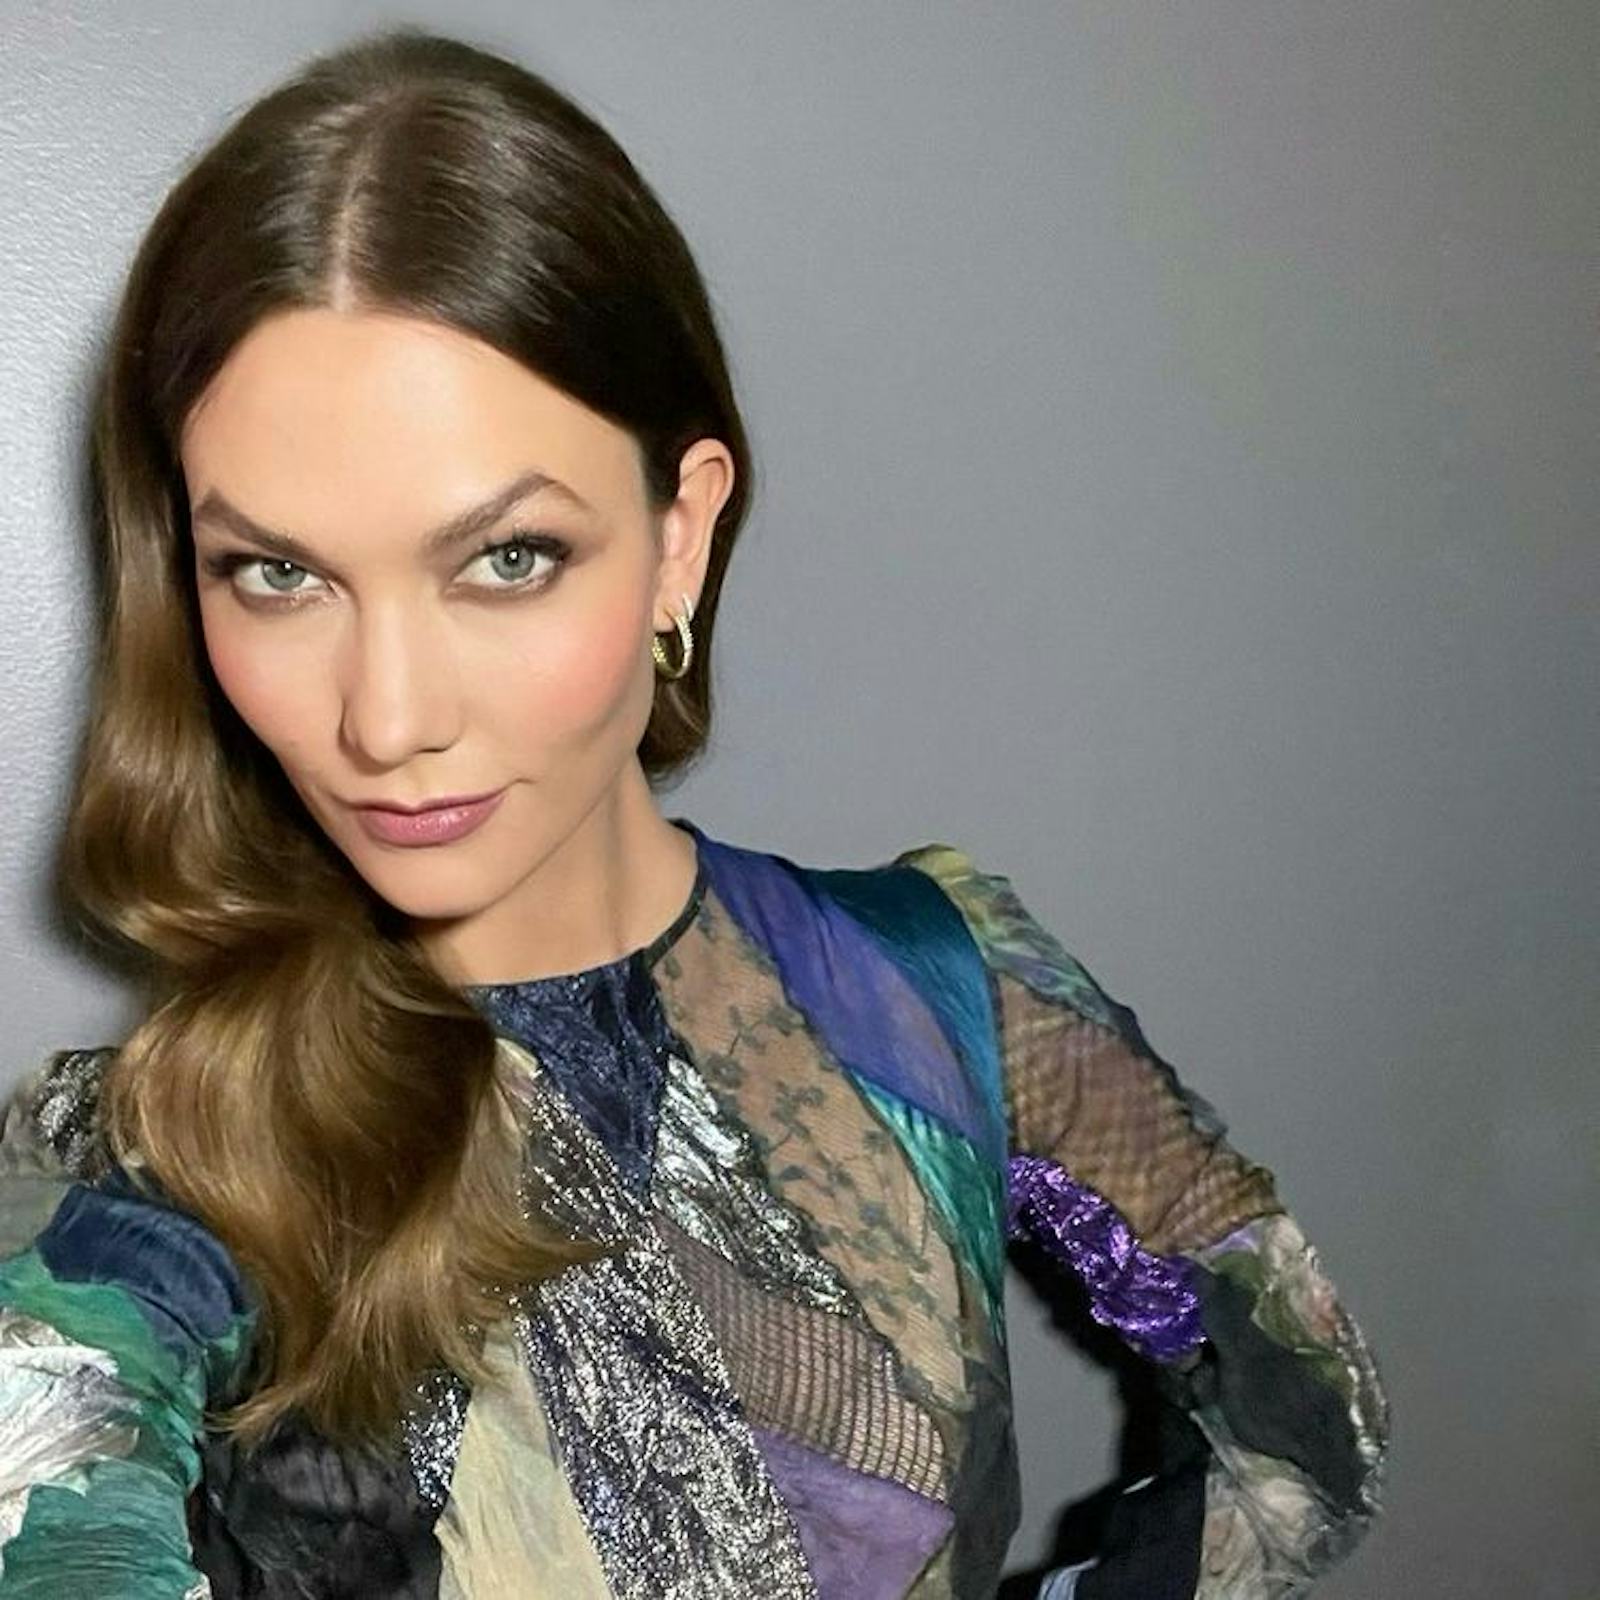 Karlie Kloss’ Subtle-Yet-Sultry Birthday Makeup Is The Perfect Fall Look